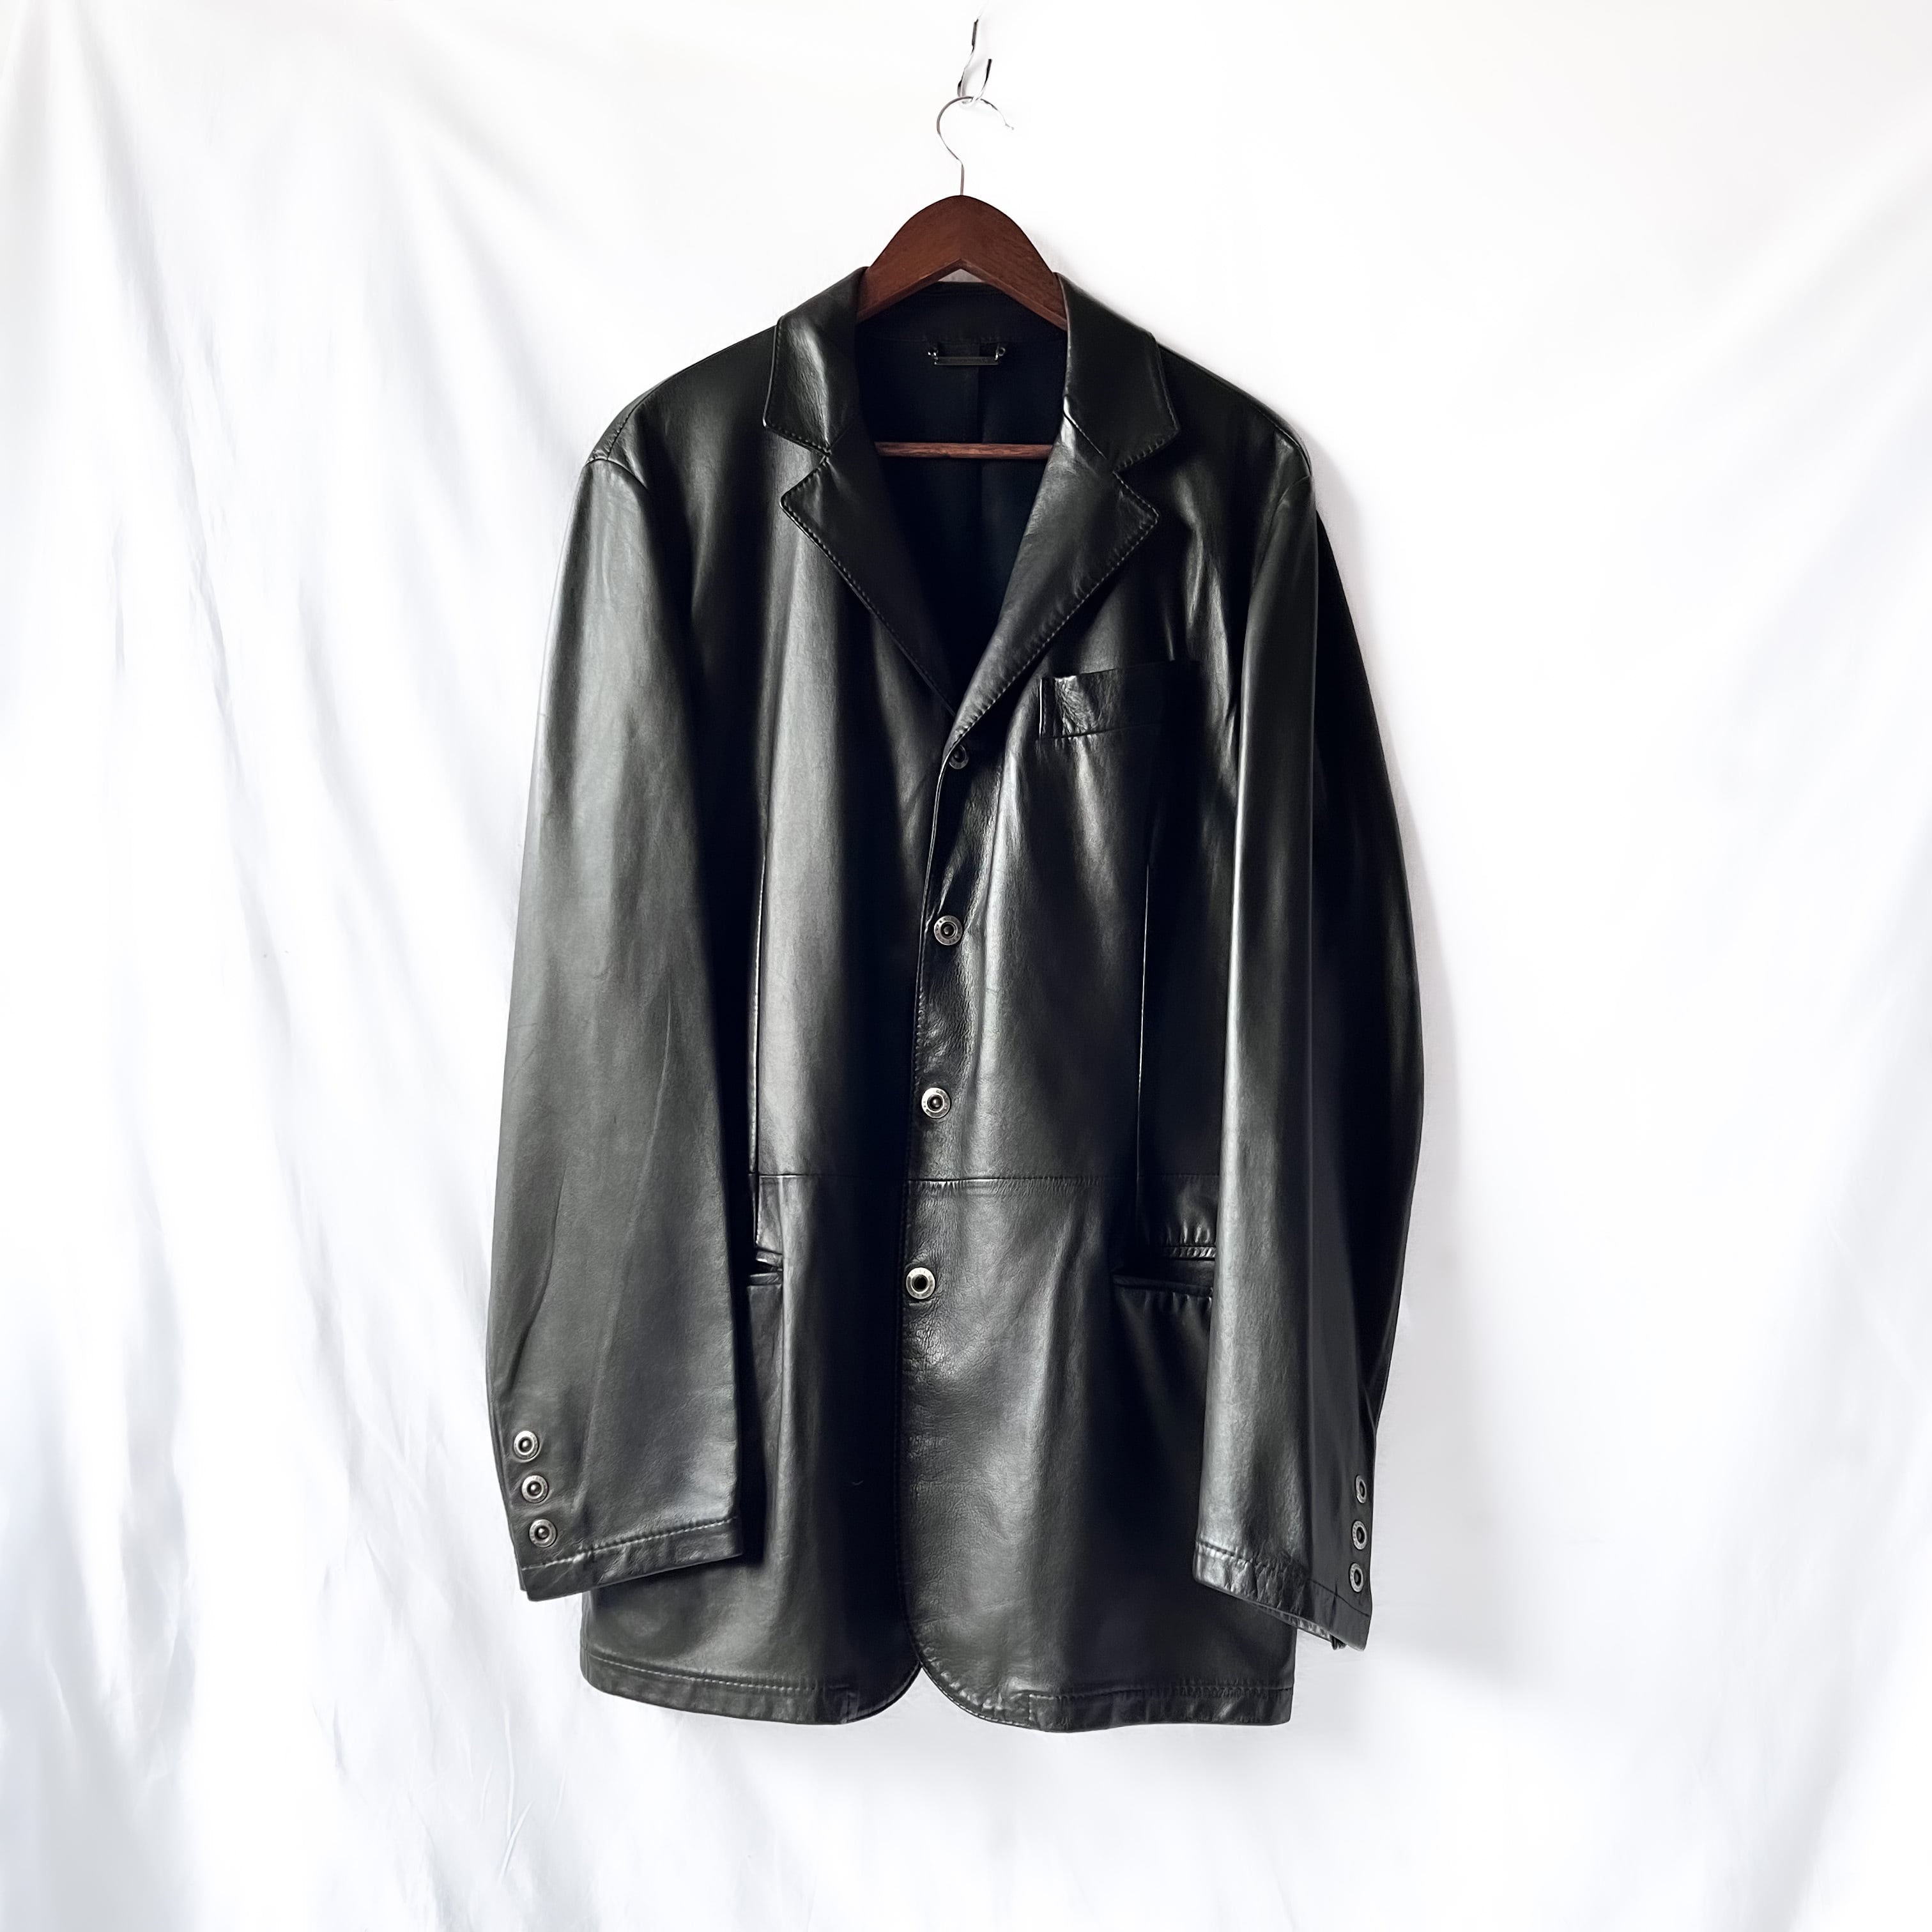 90s “GIANFRANCO FERRE” sheep leather jacket made in italy ジャン